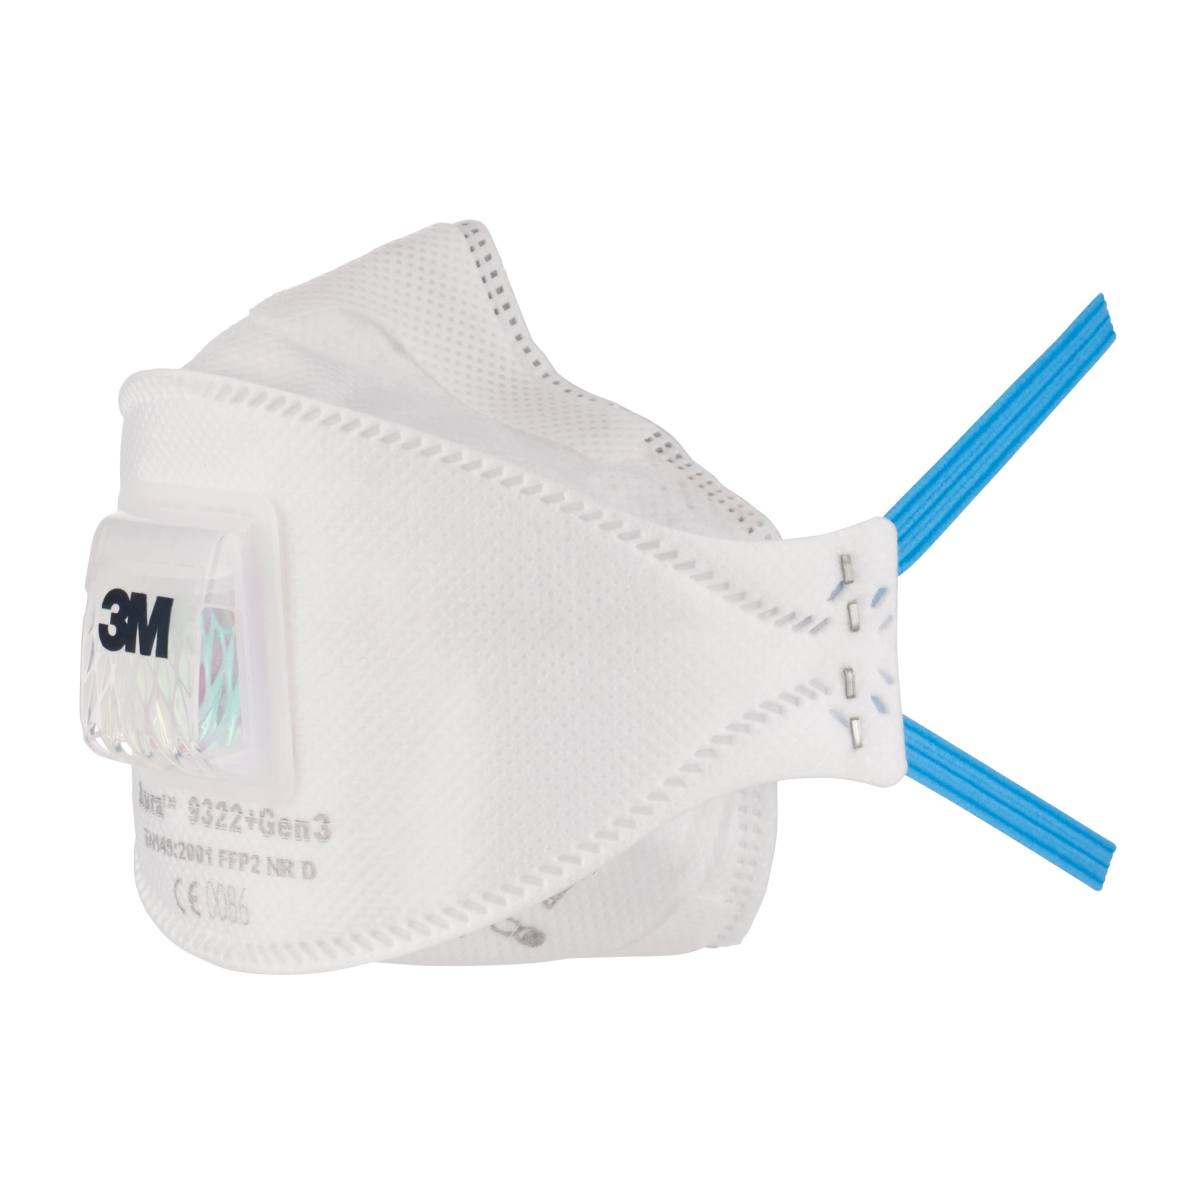 3M 9322+ Gen3 Aura respirator FFP2 with cool-flow exhalation valve, up to 10 times the limit value (hygienically individually packaged)